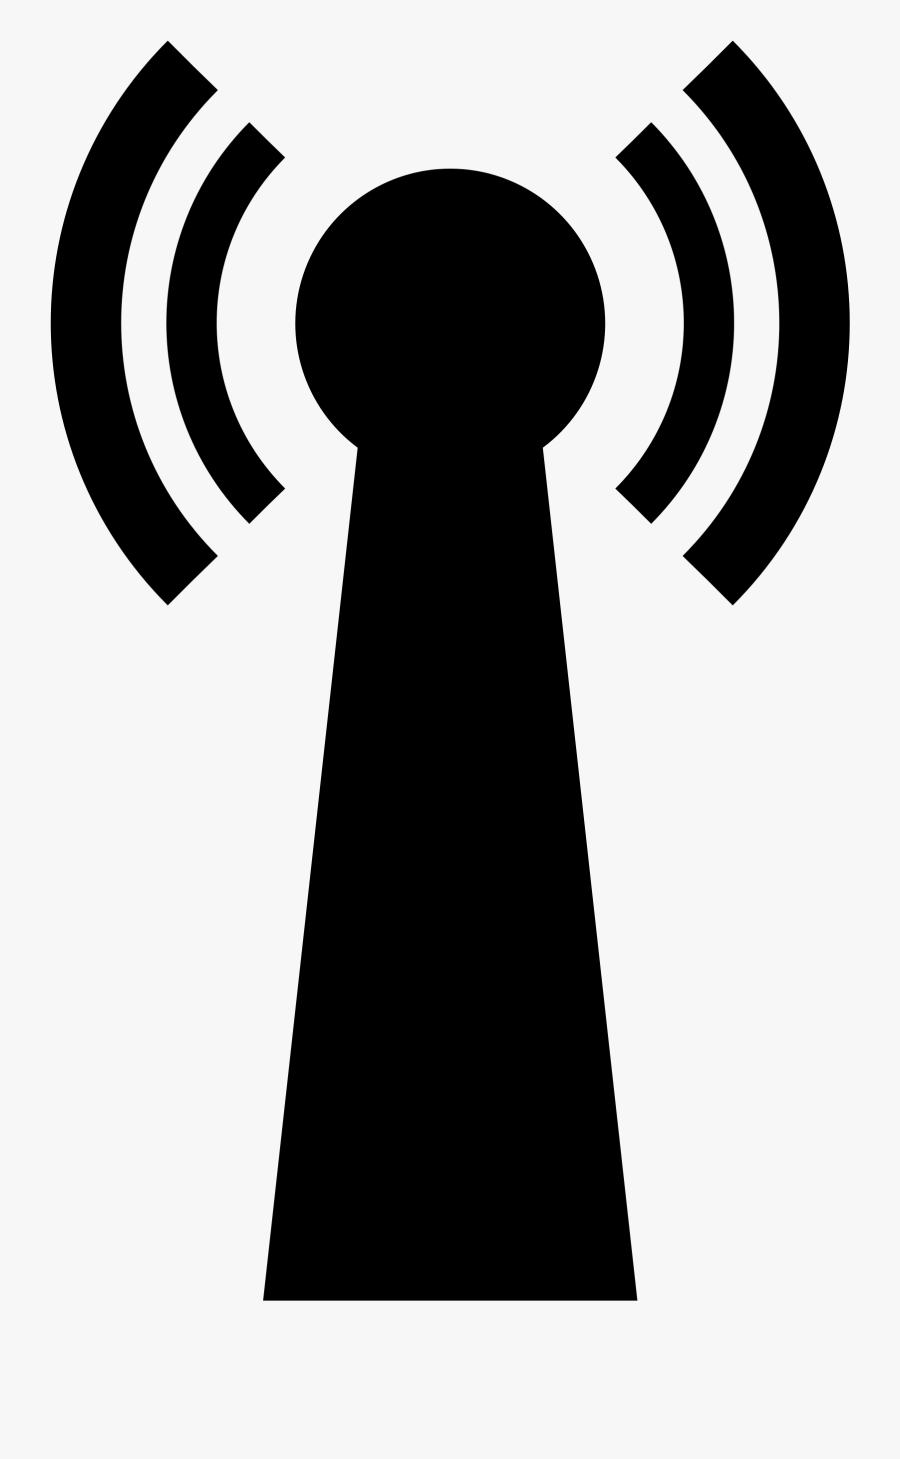 File Antennensymbol Svg Wikimedia - Antenna Tower Icon, Transparent Clipart